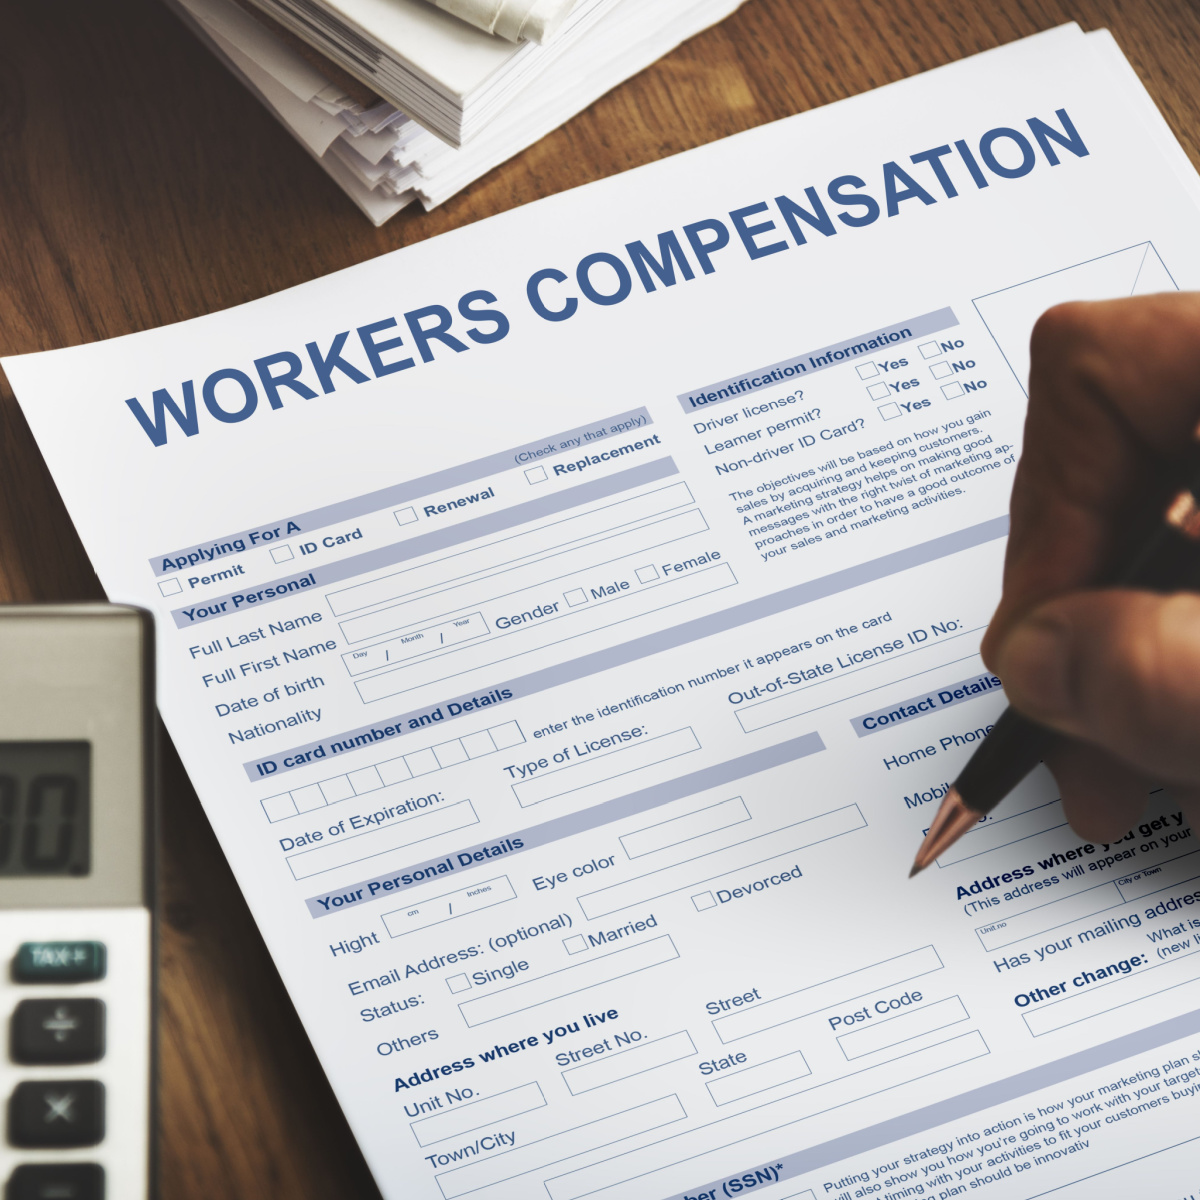 A Houston personal injury lawyer assisting with workers' compensation claim.